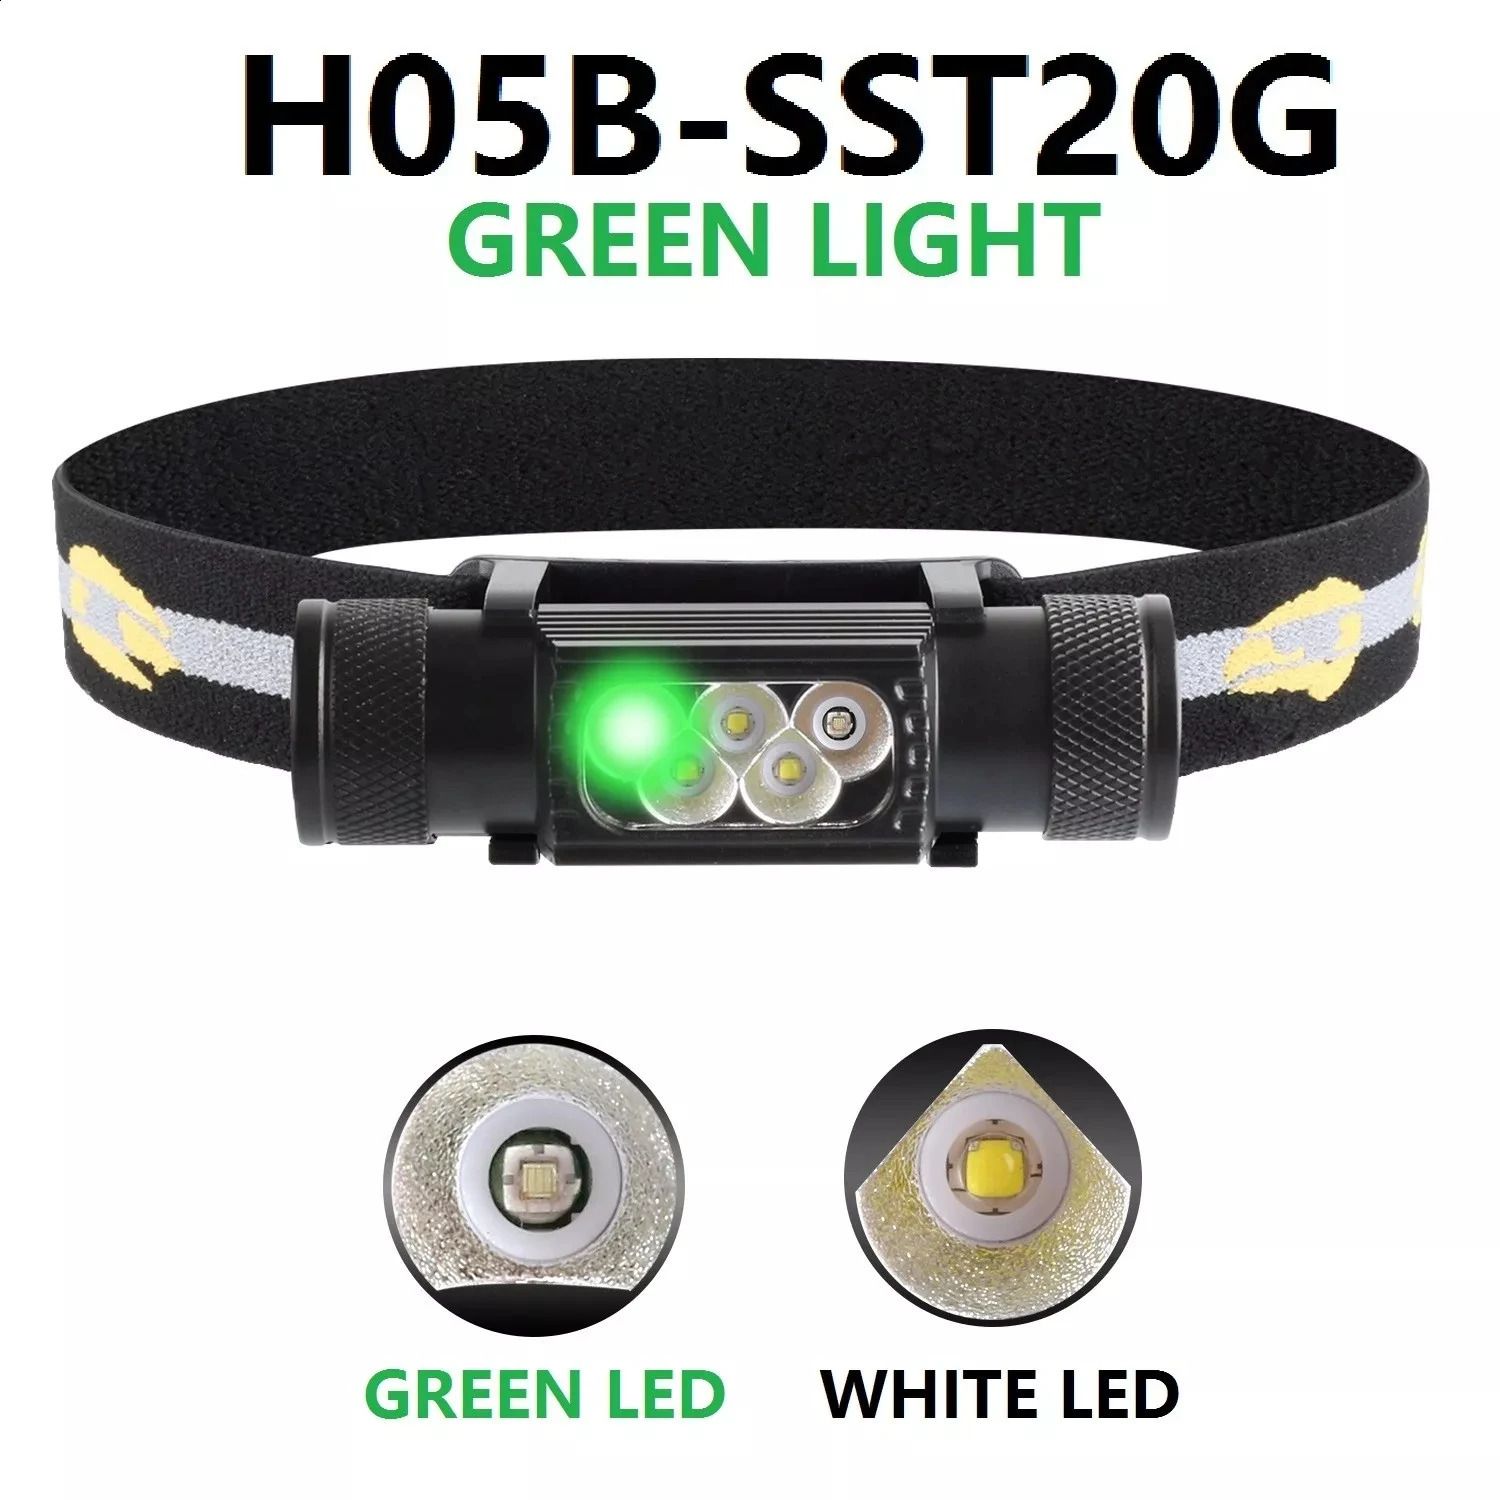 H05b-green-with 18650 Battery